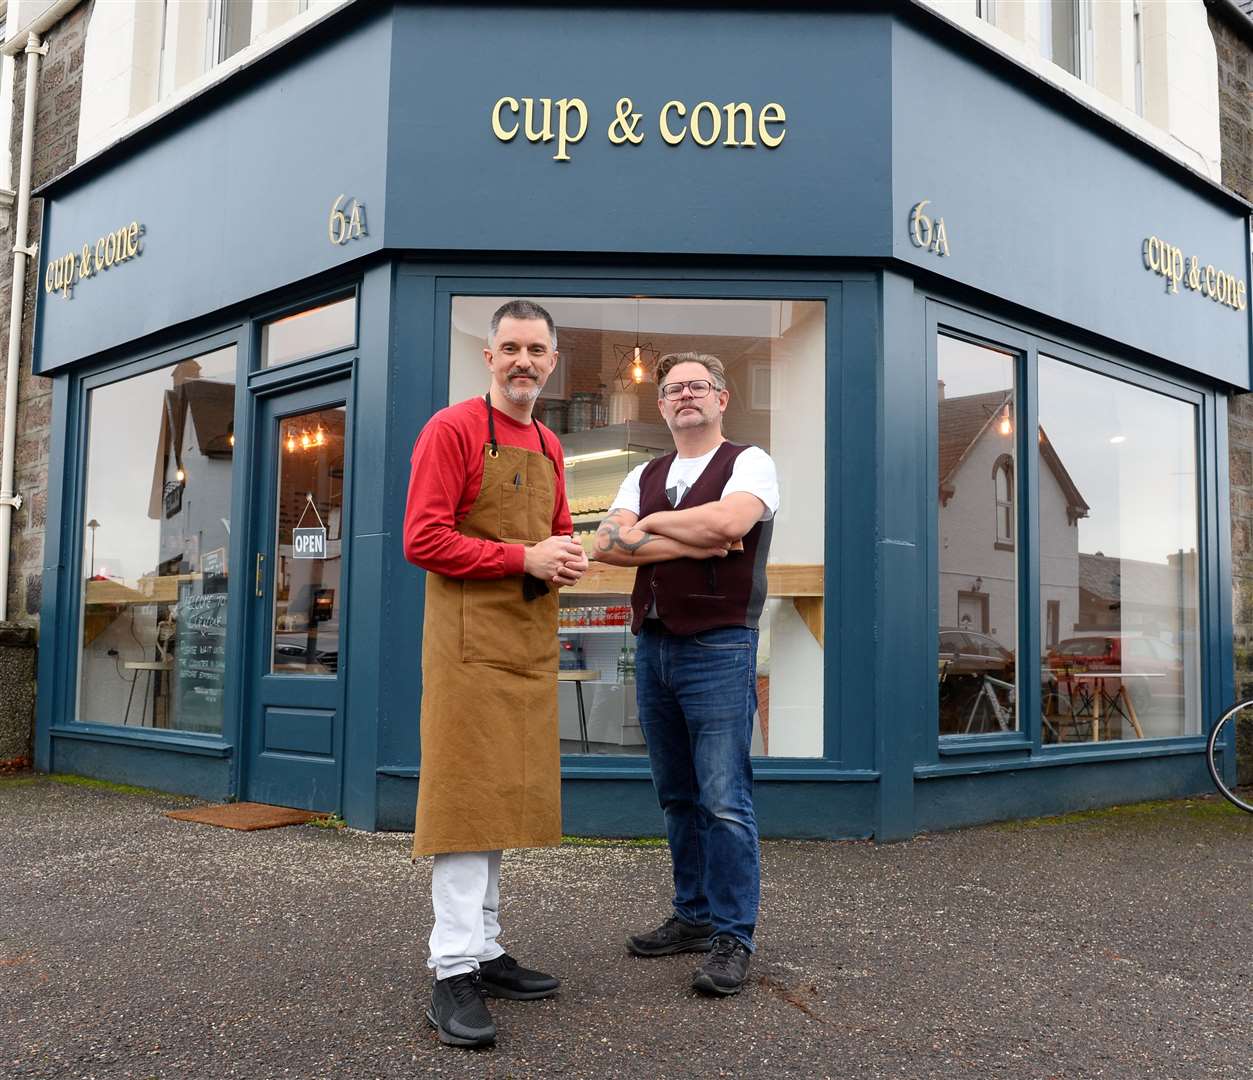 Co-owners of the Cup and Cone, Peter Henderson and John Ewart.